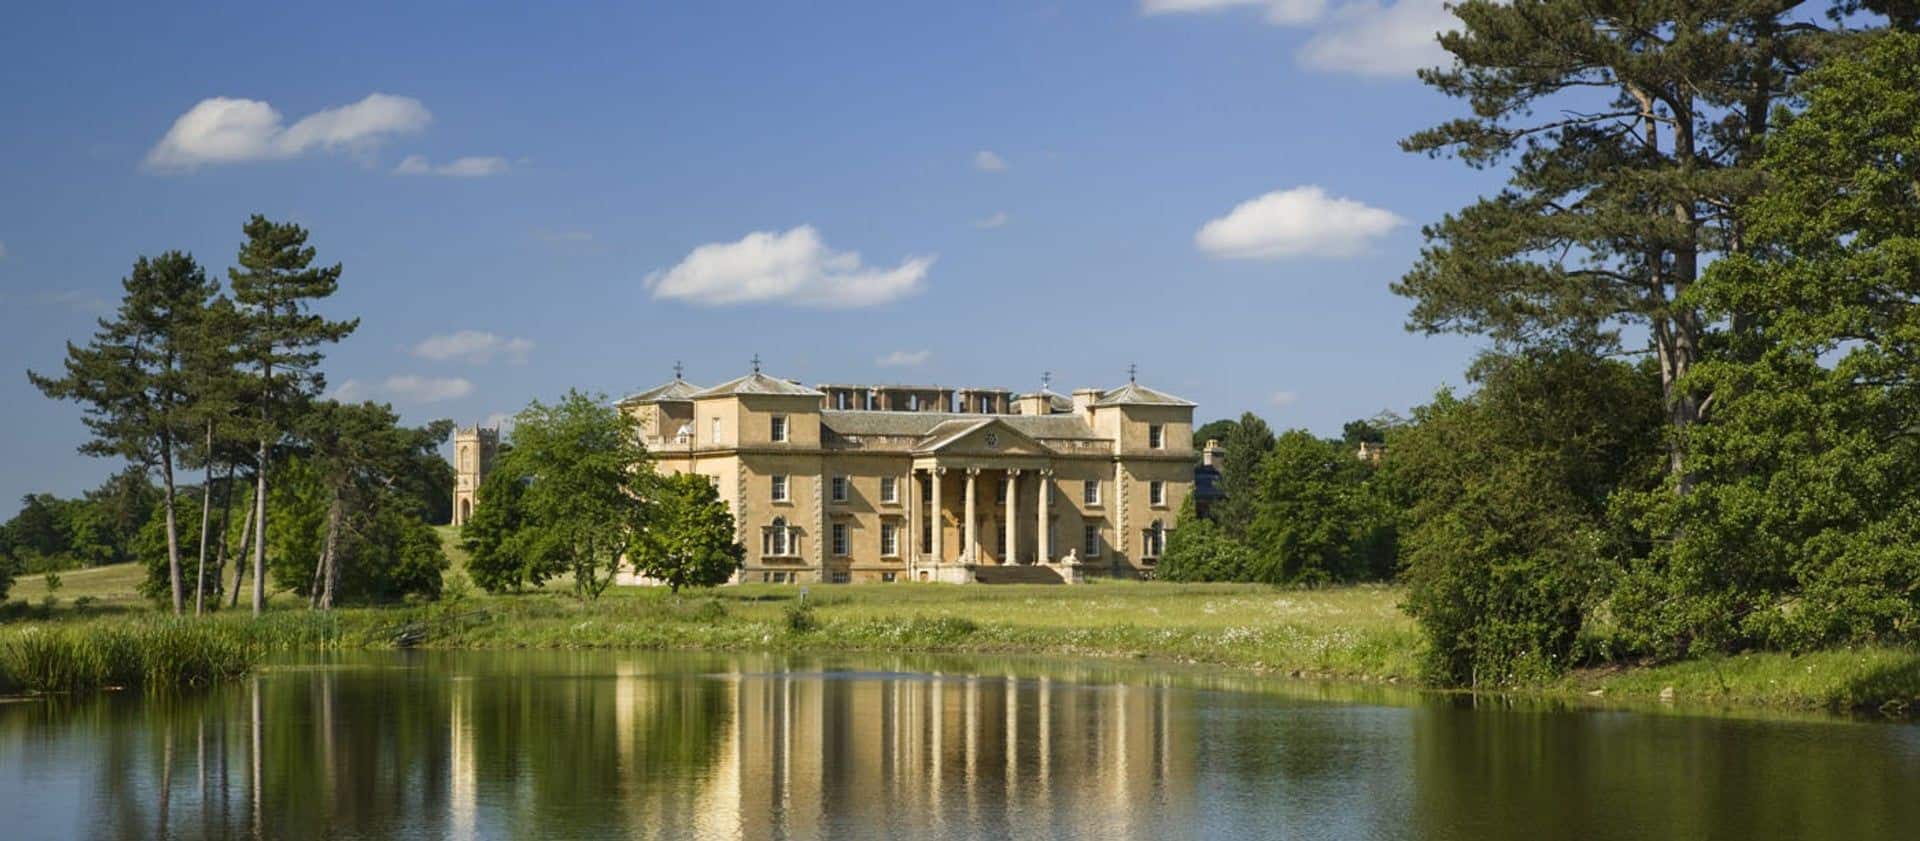 Croome Court in UK